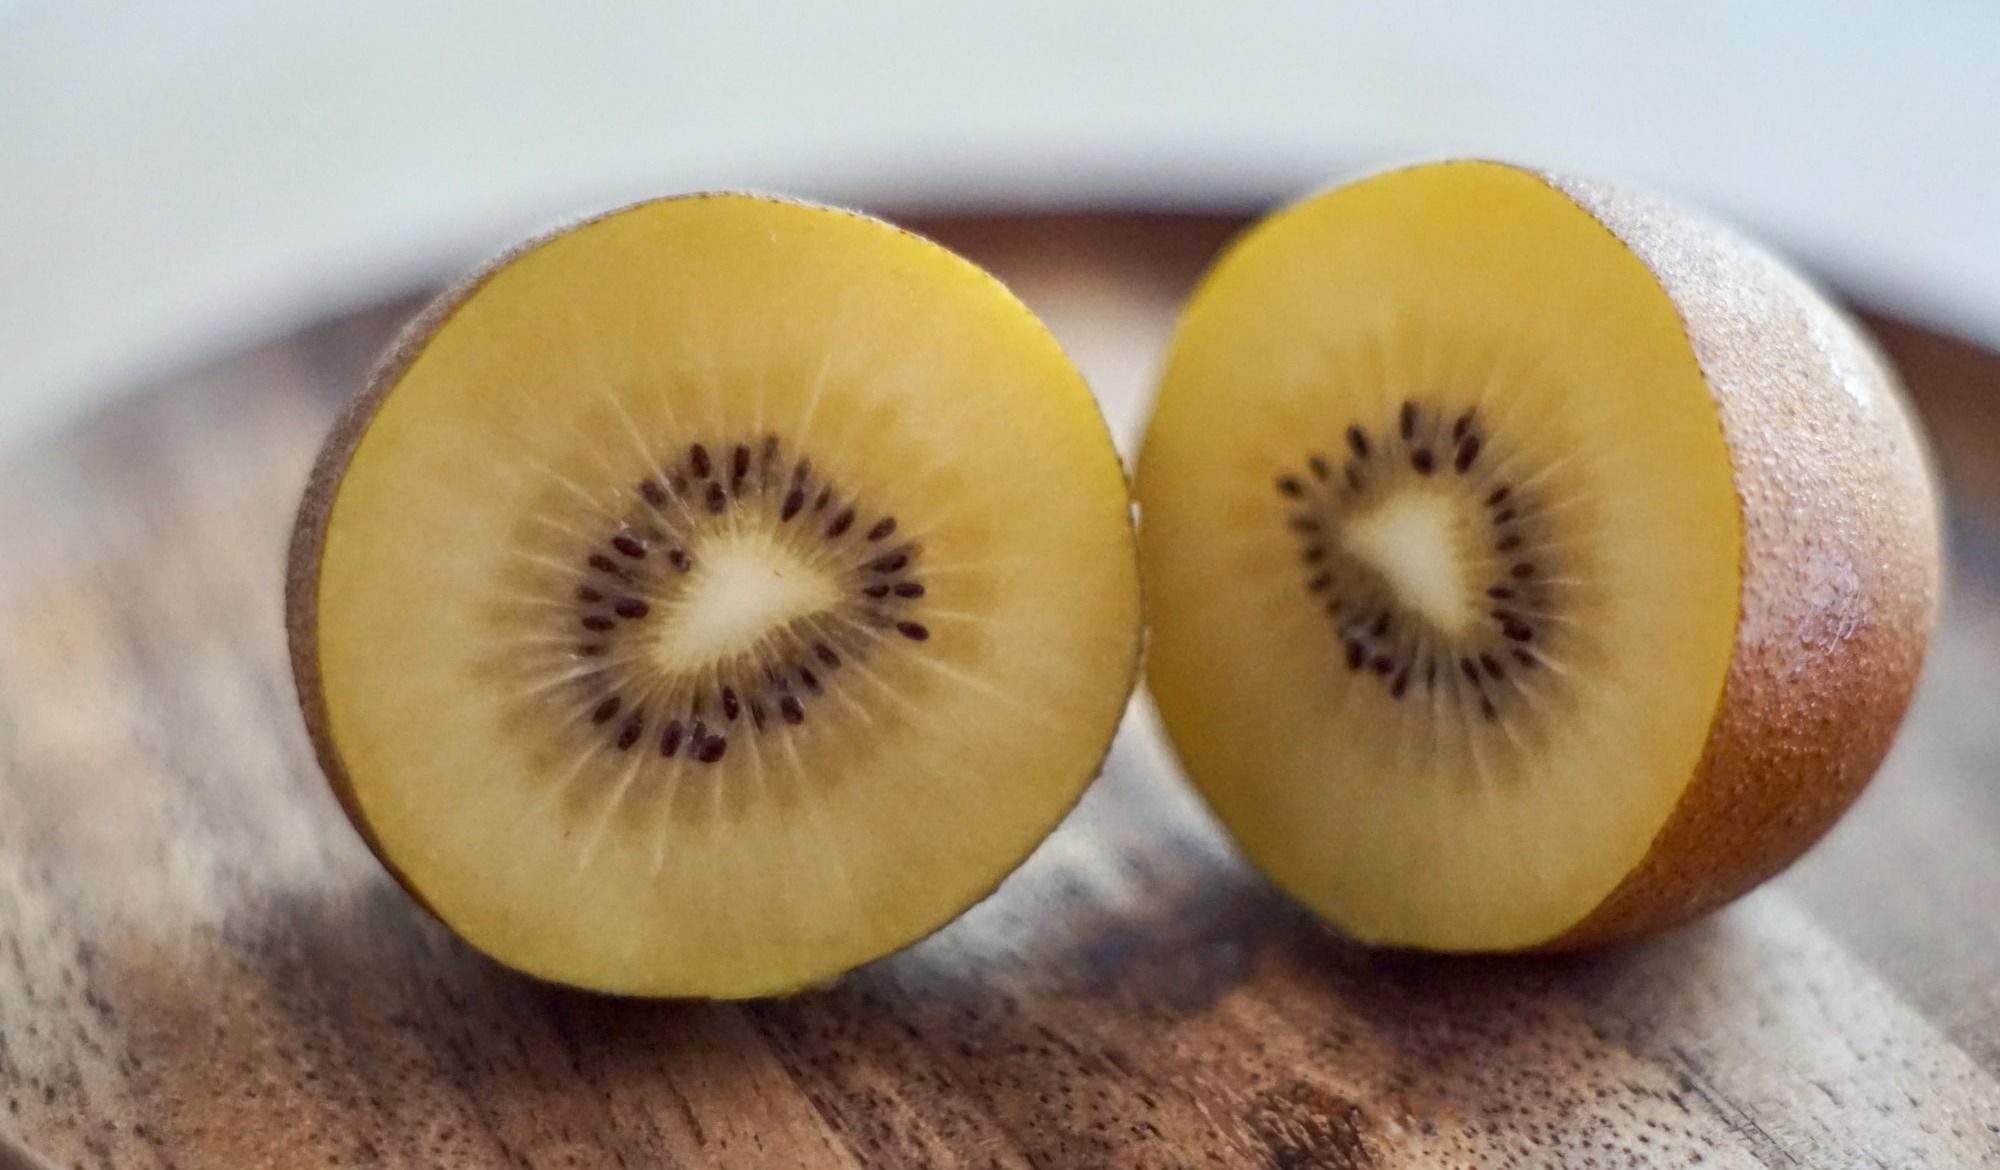 sliced yellow fruit on brown wooden table